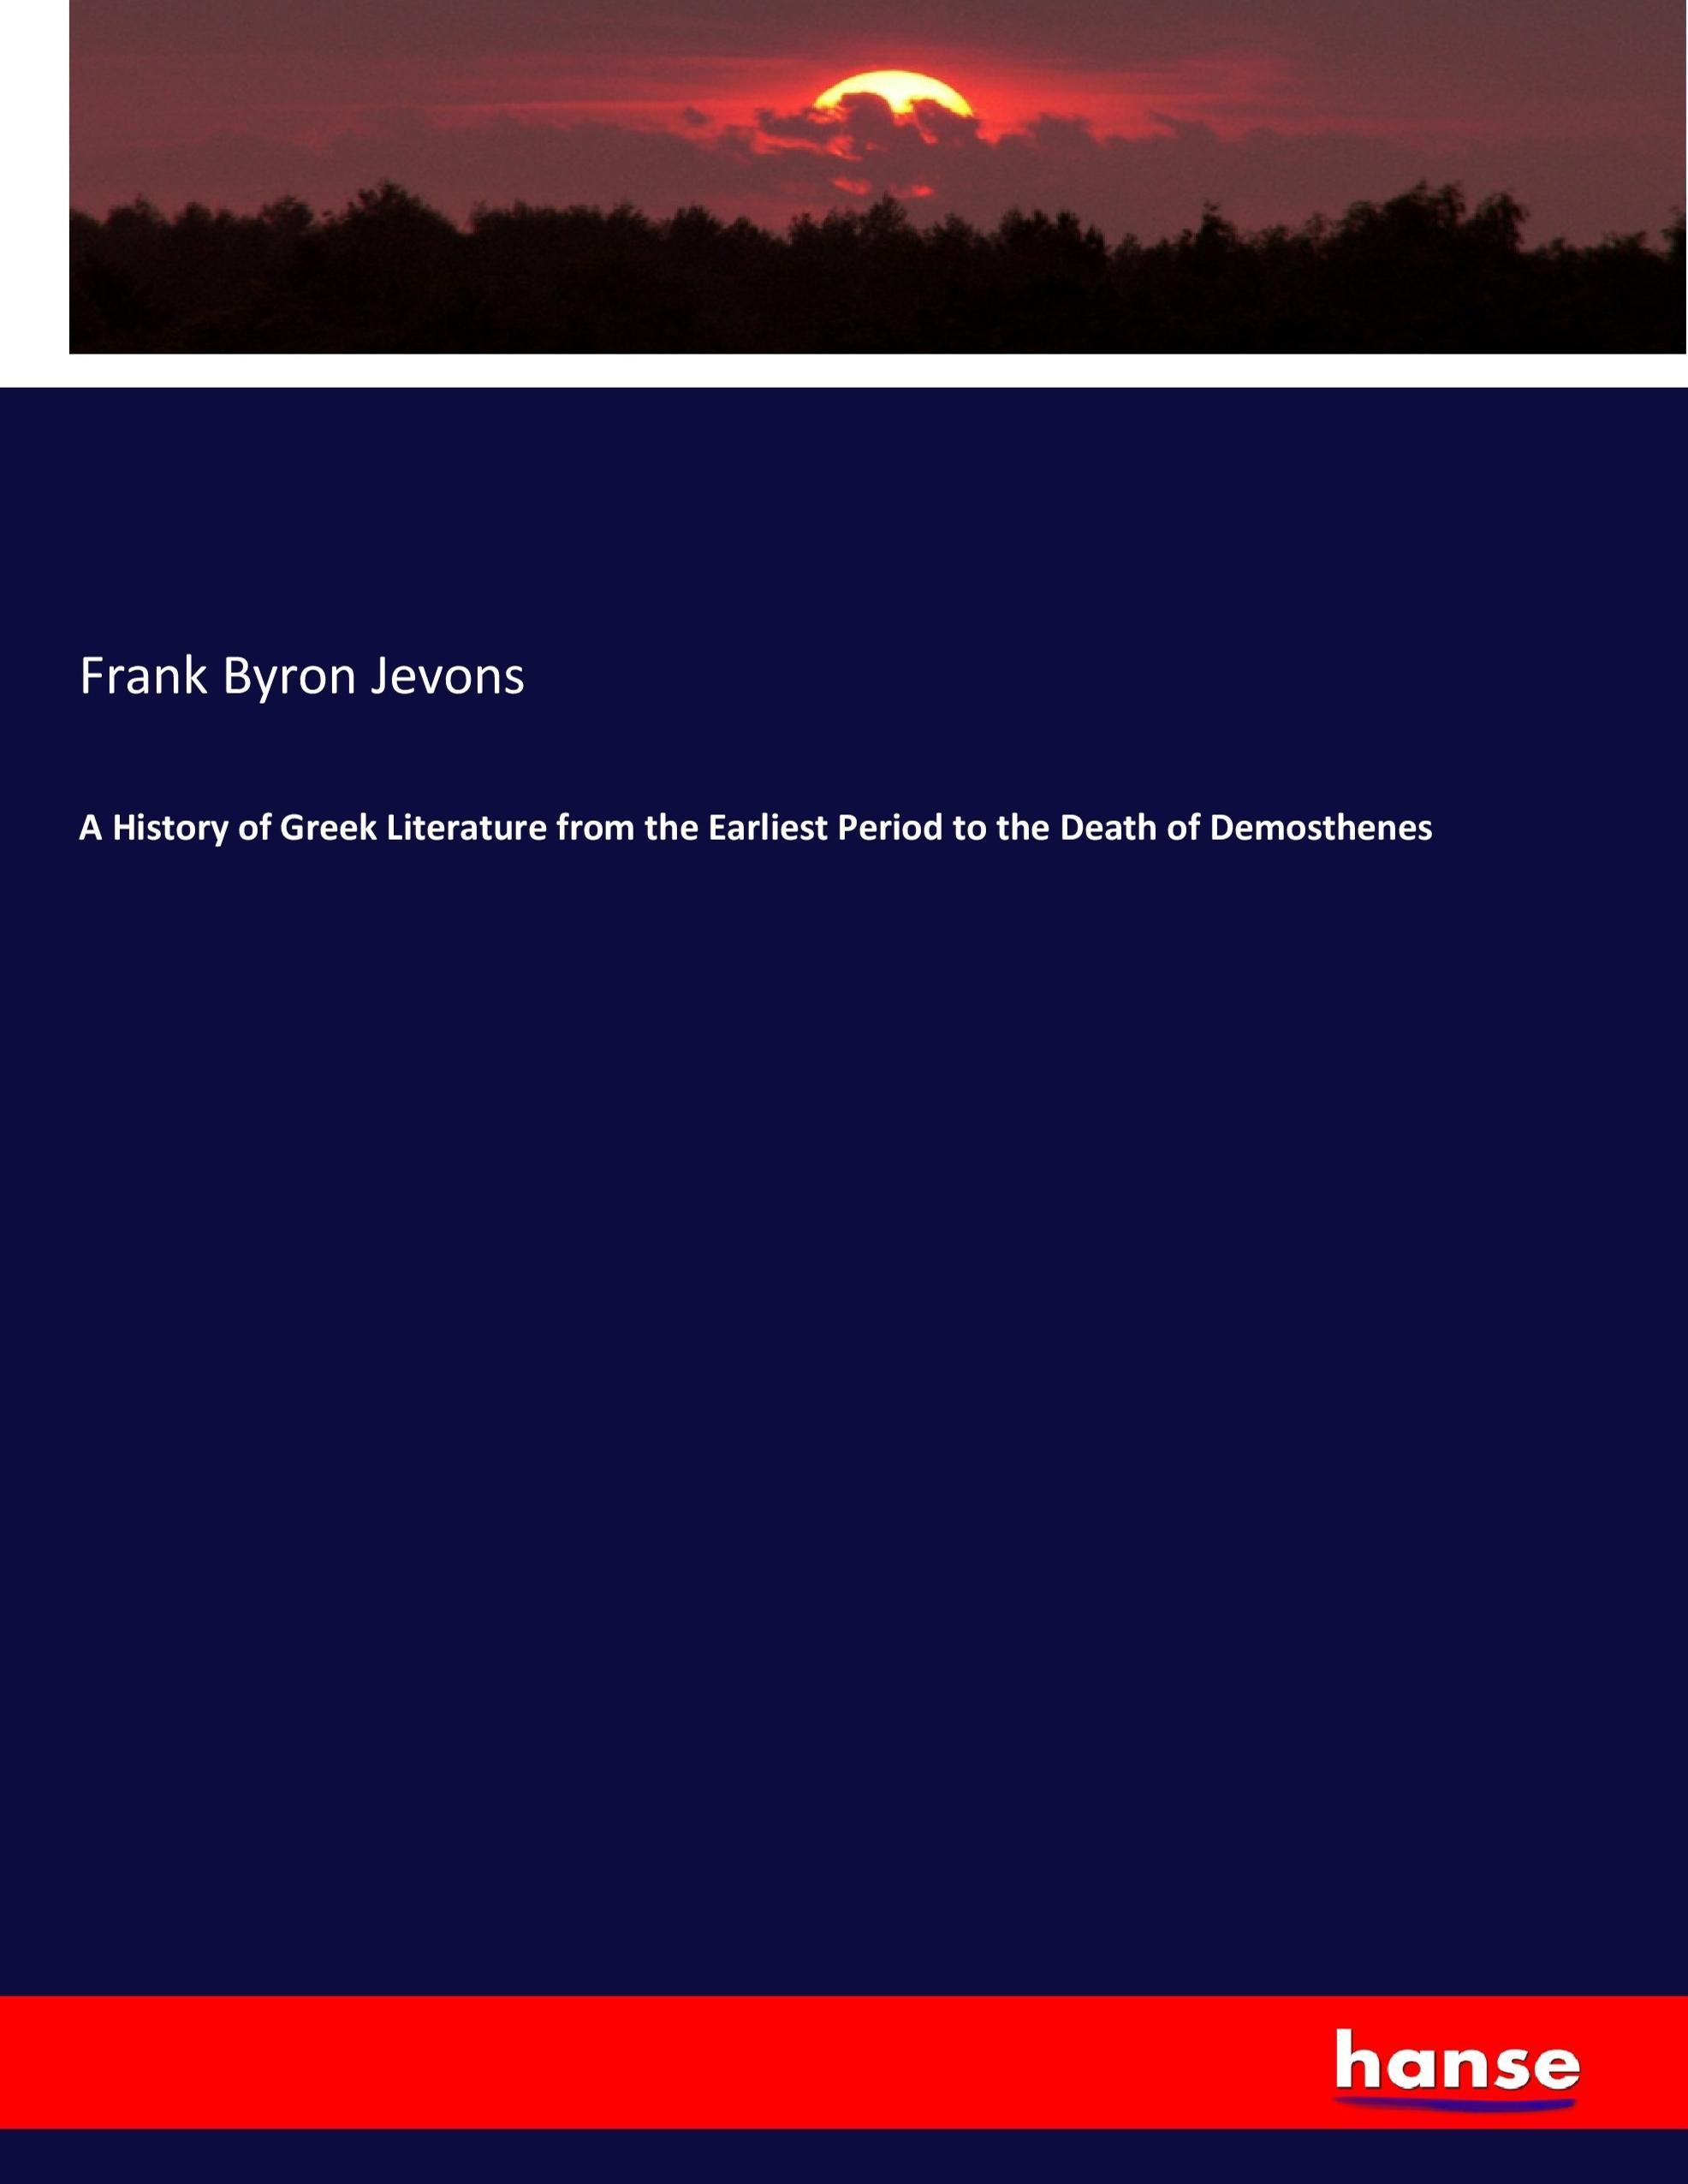 A History of Greek Literature from the Earliest Period to the Death of Demosthenes / Frank Byron Jevons / Taschenbuch / Paperback / 532 S. / Englisch / 2017 / hansebooks / EAN 9783337388478 - Jevons, Frank Byron